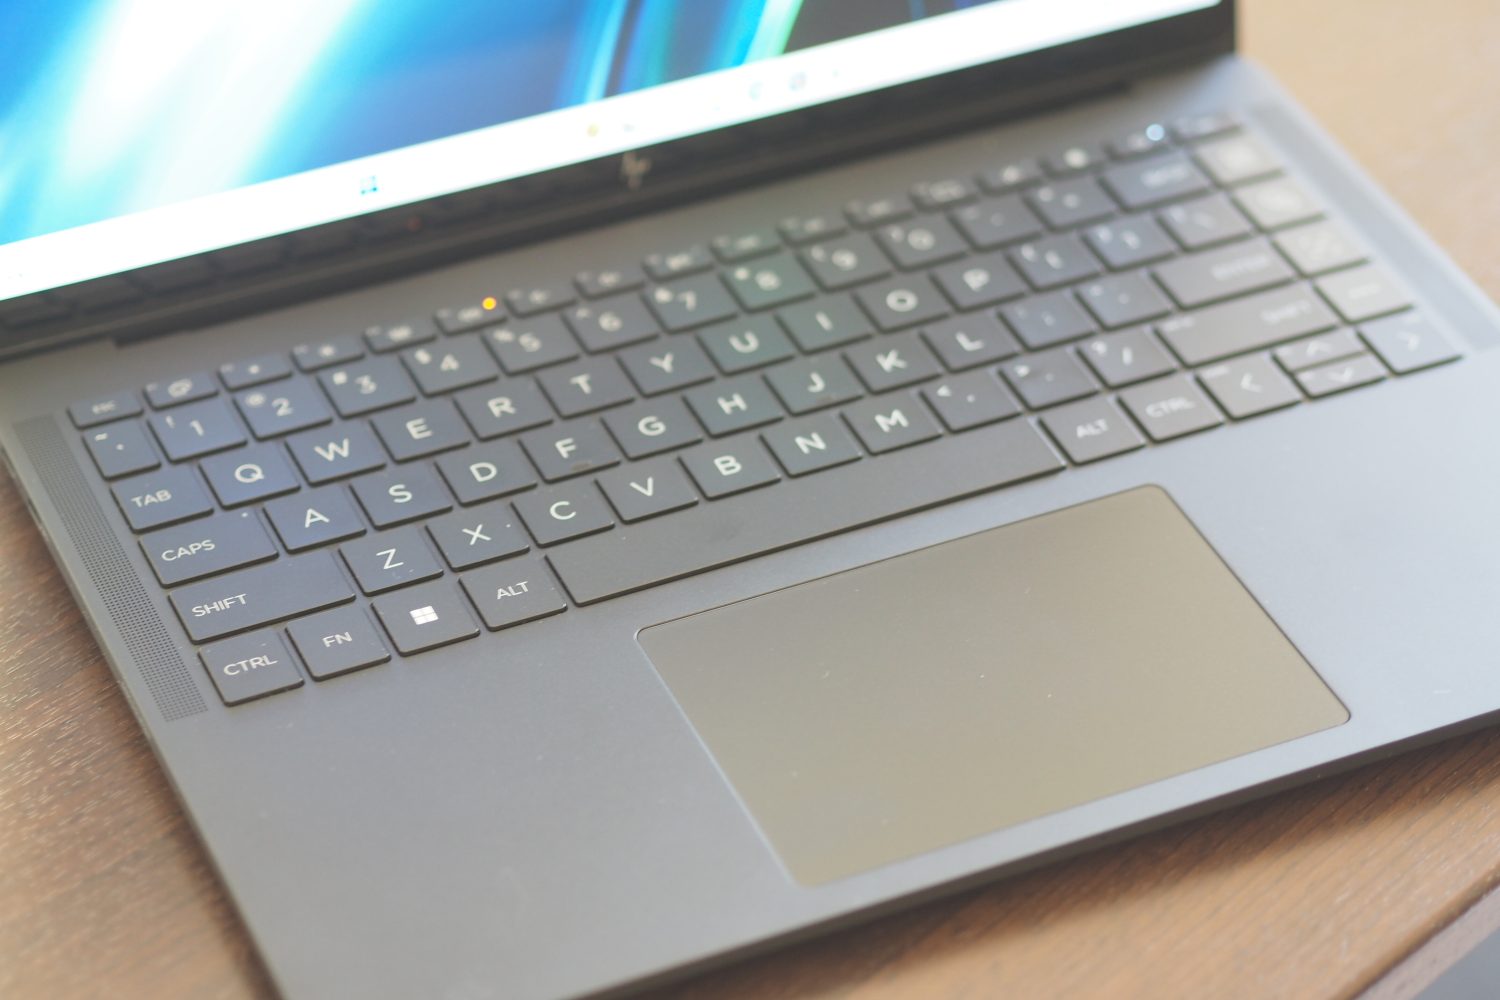 HP Dragonfly Pro keyboard and touchpad.